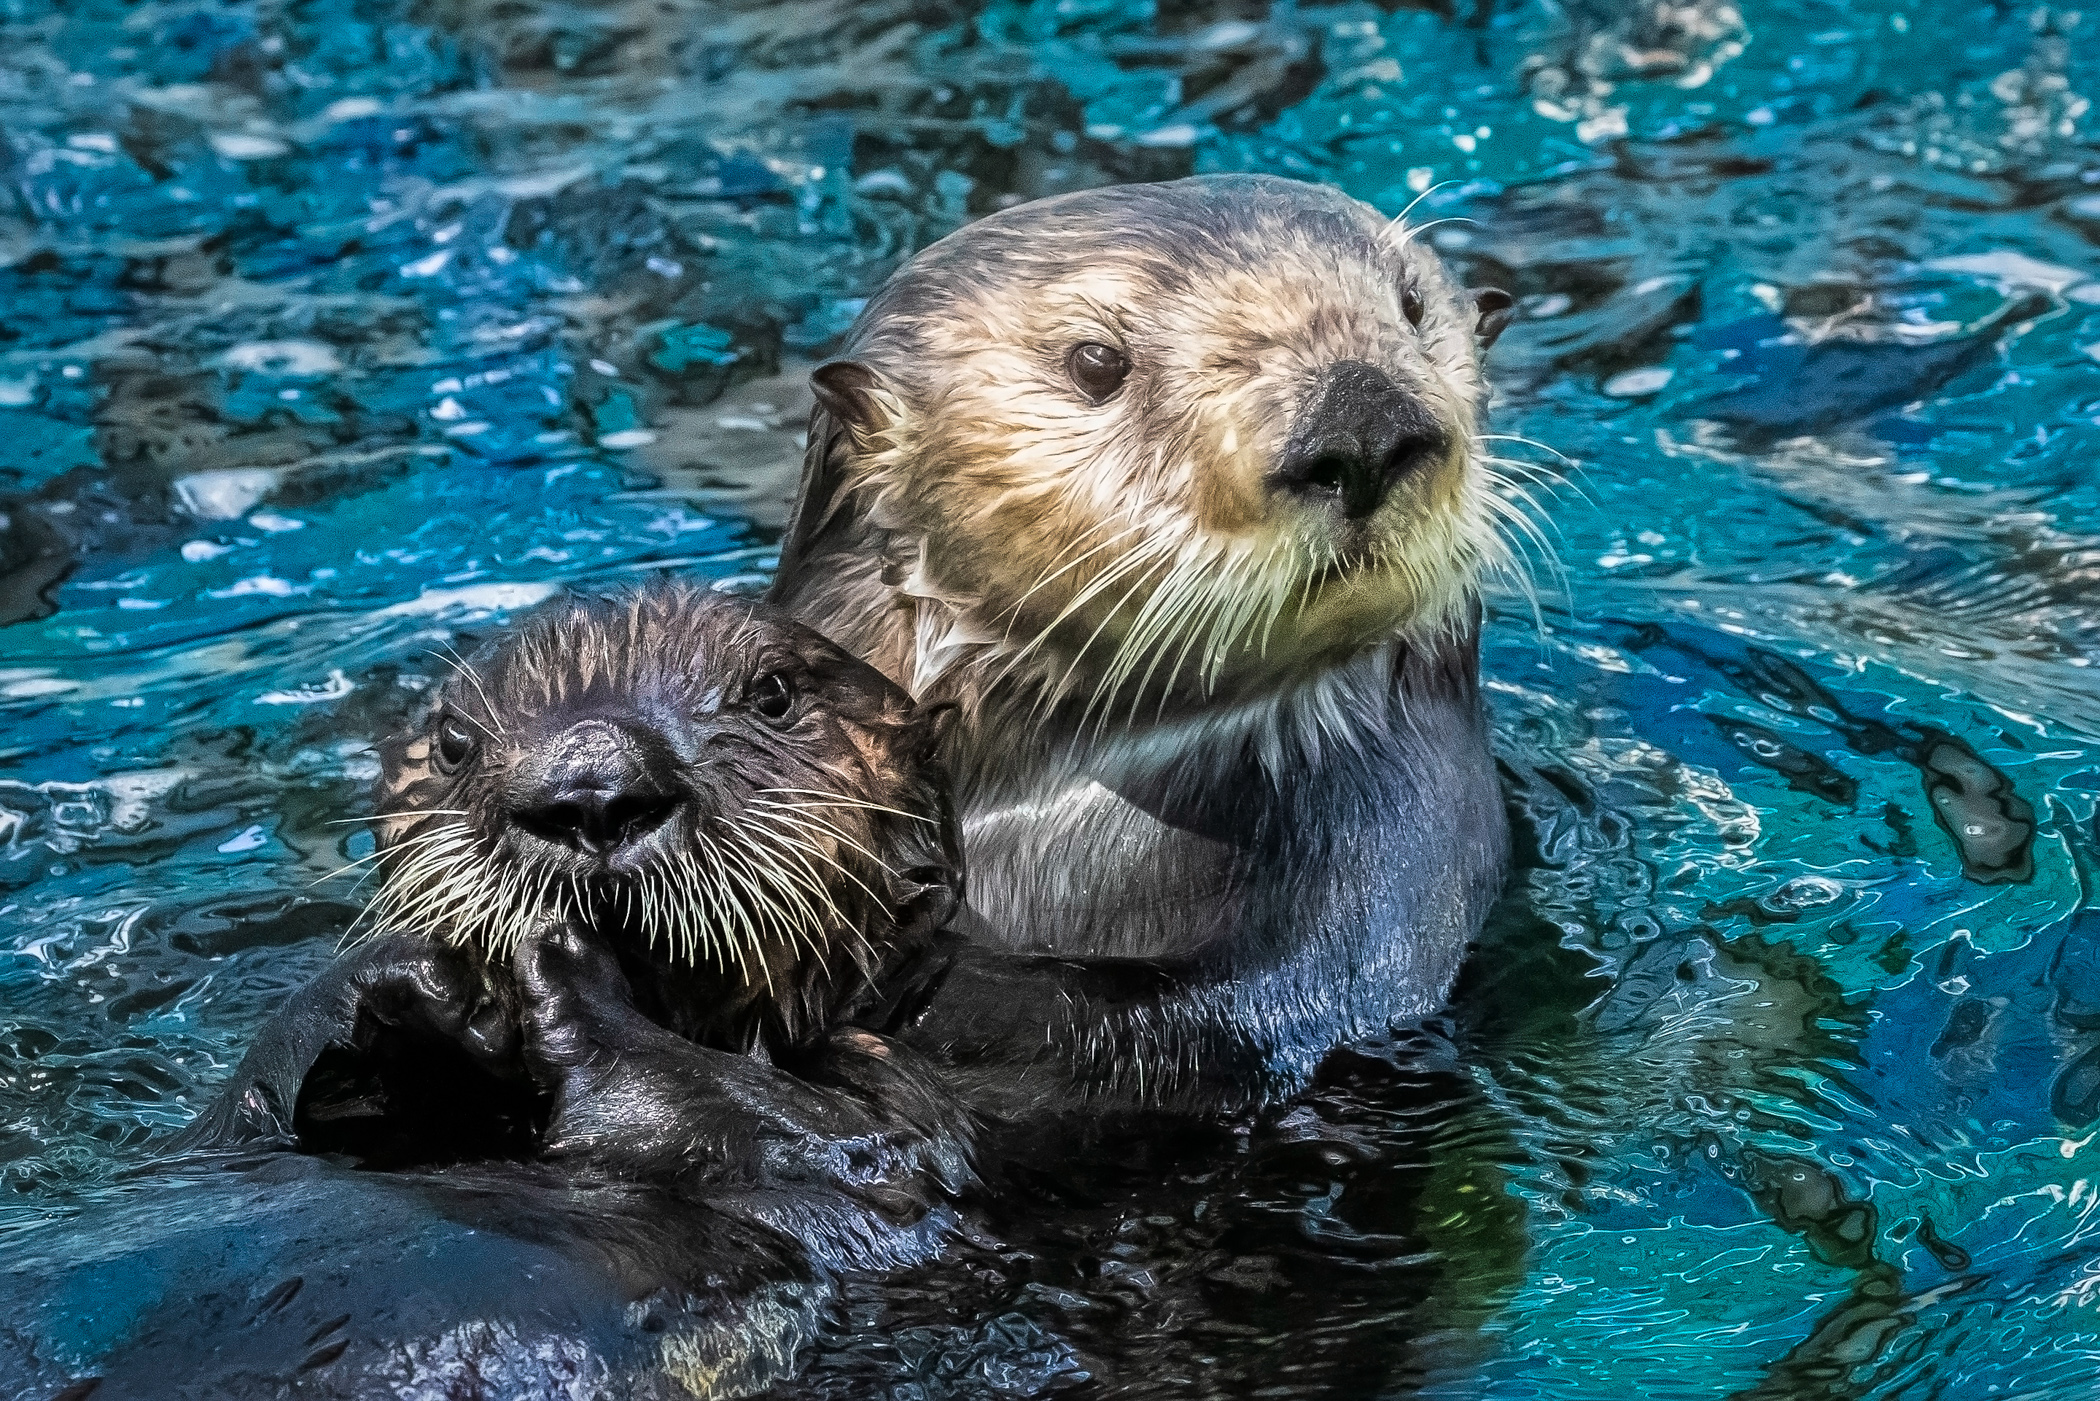 Two sea otters floating together